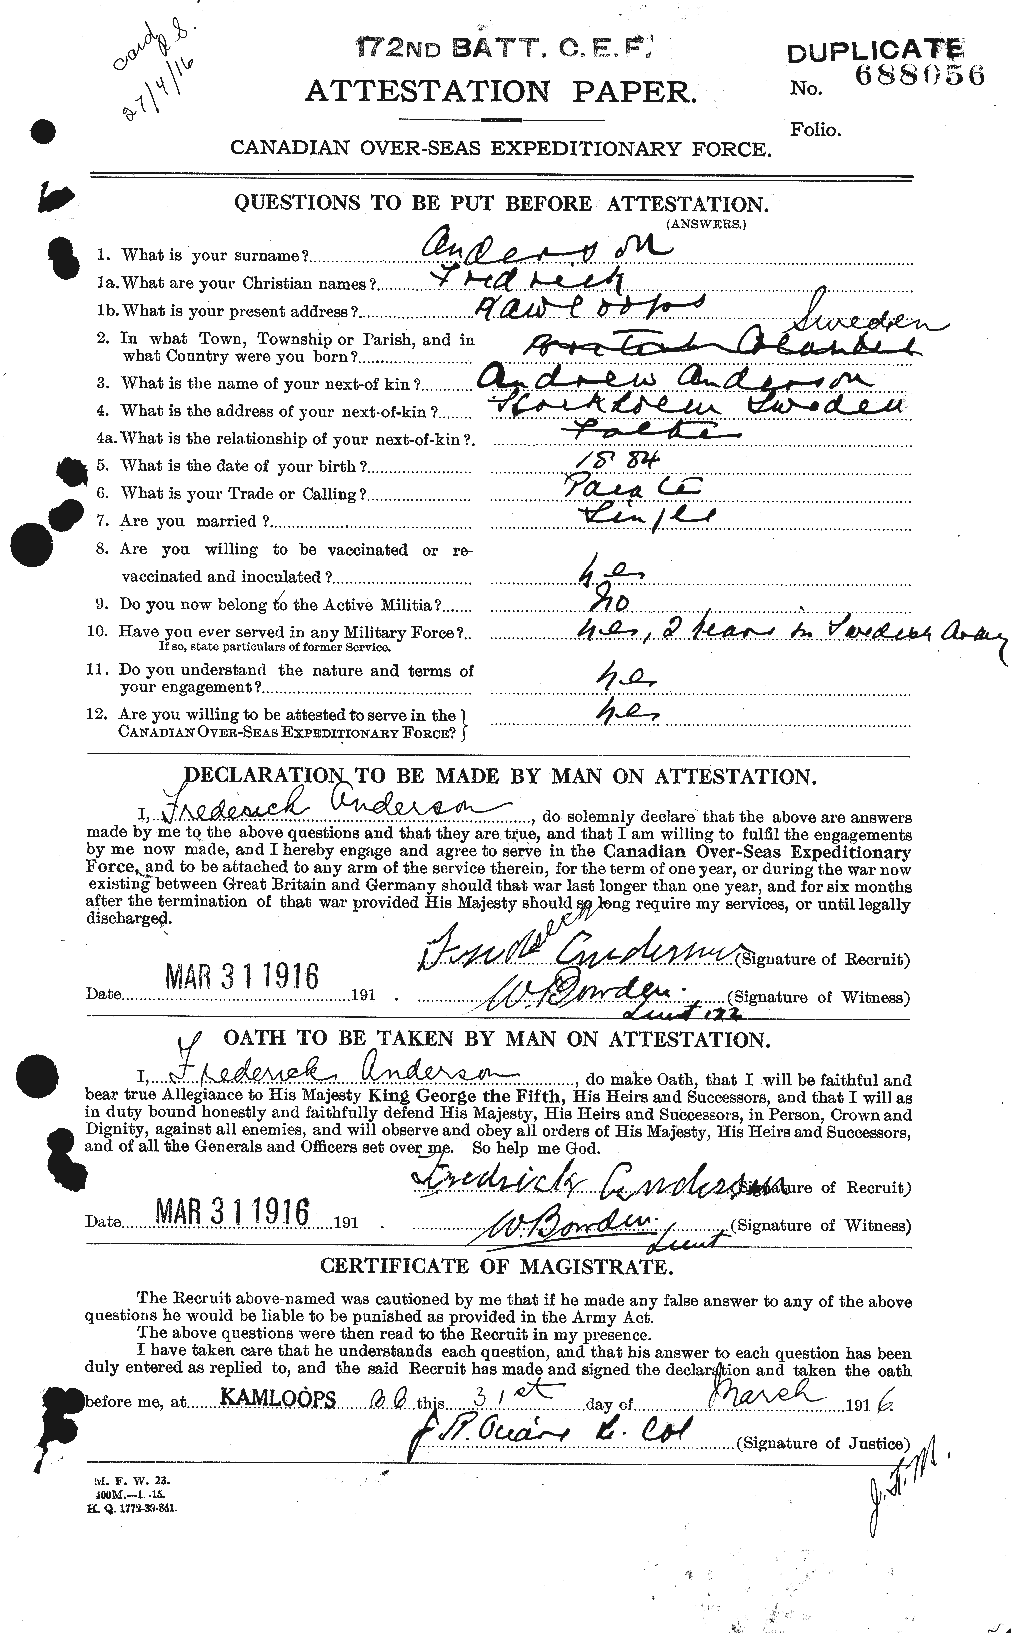 Personnel Records of the First World War - CEF 209819a